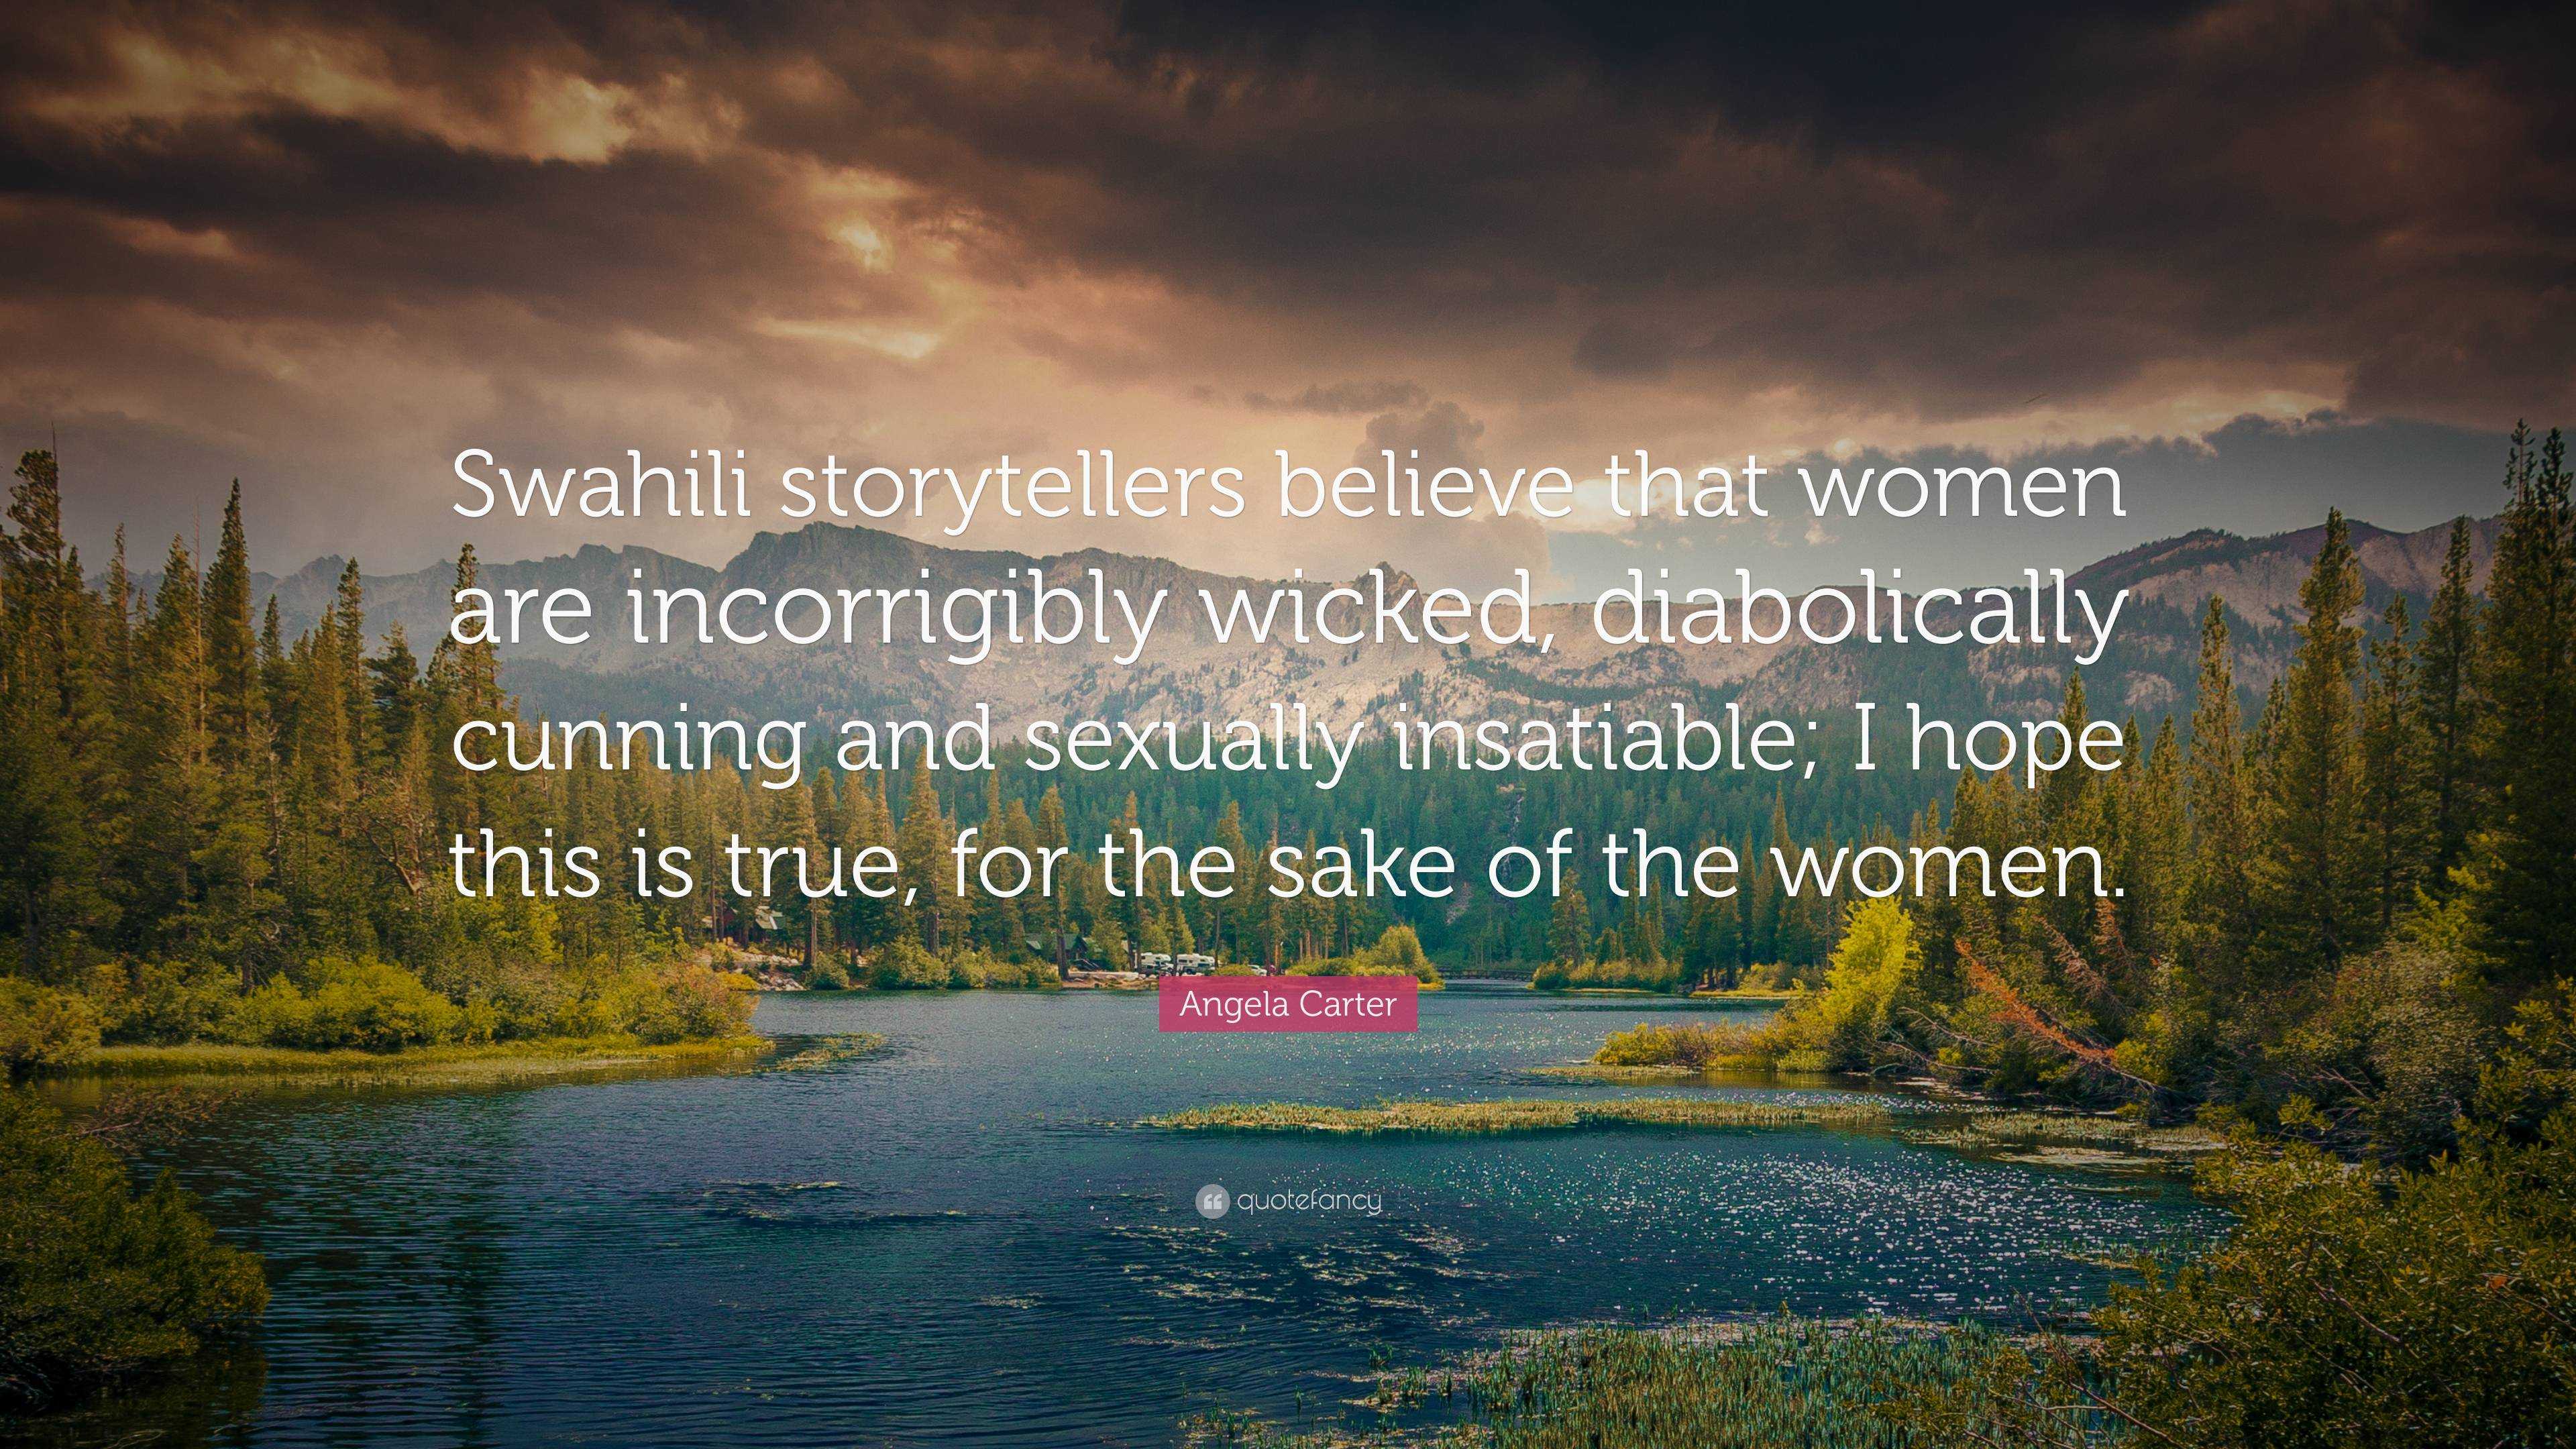 Angela Carter Quote “swahili Storytellers Believe That Women Are Incorrigibly Wicked